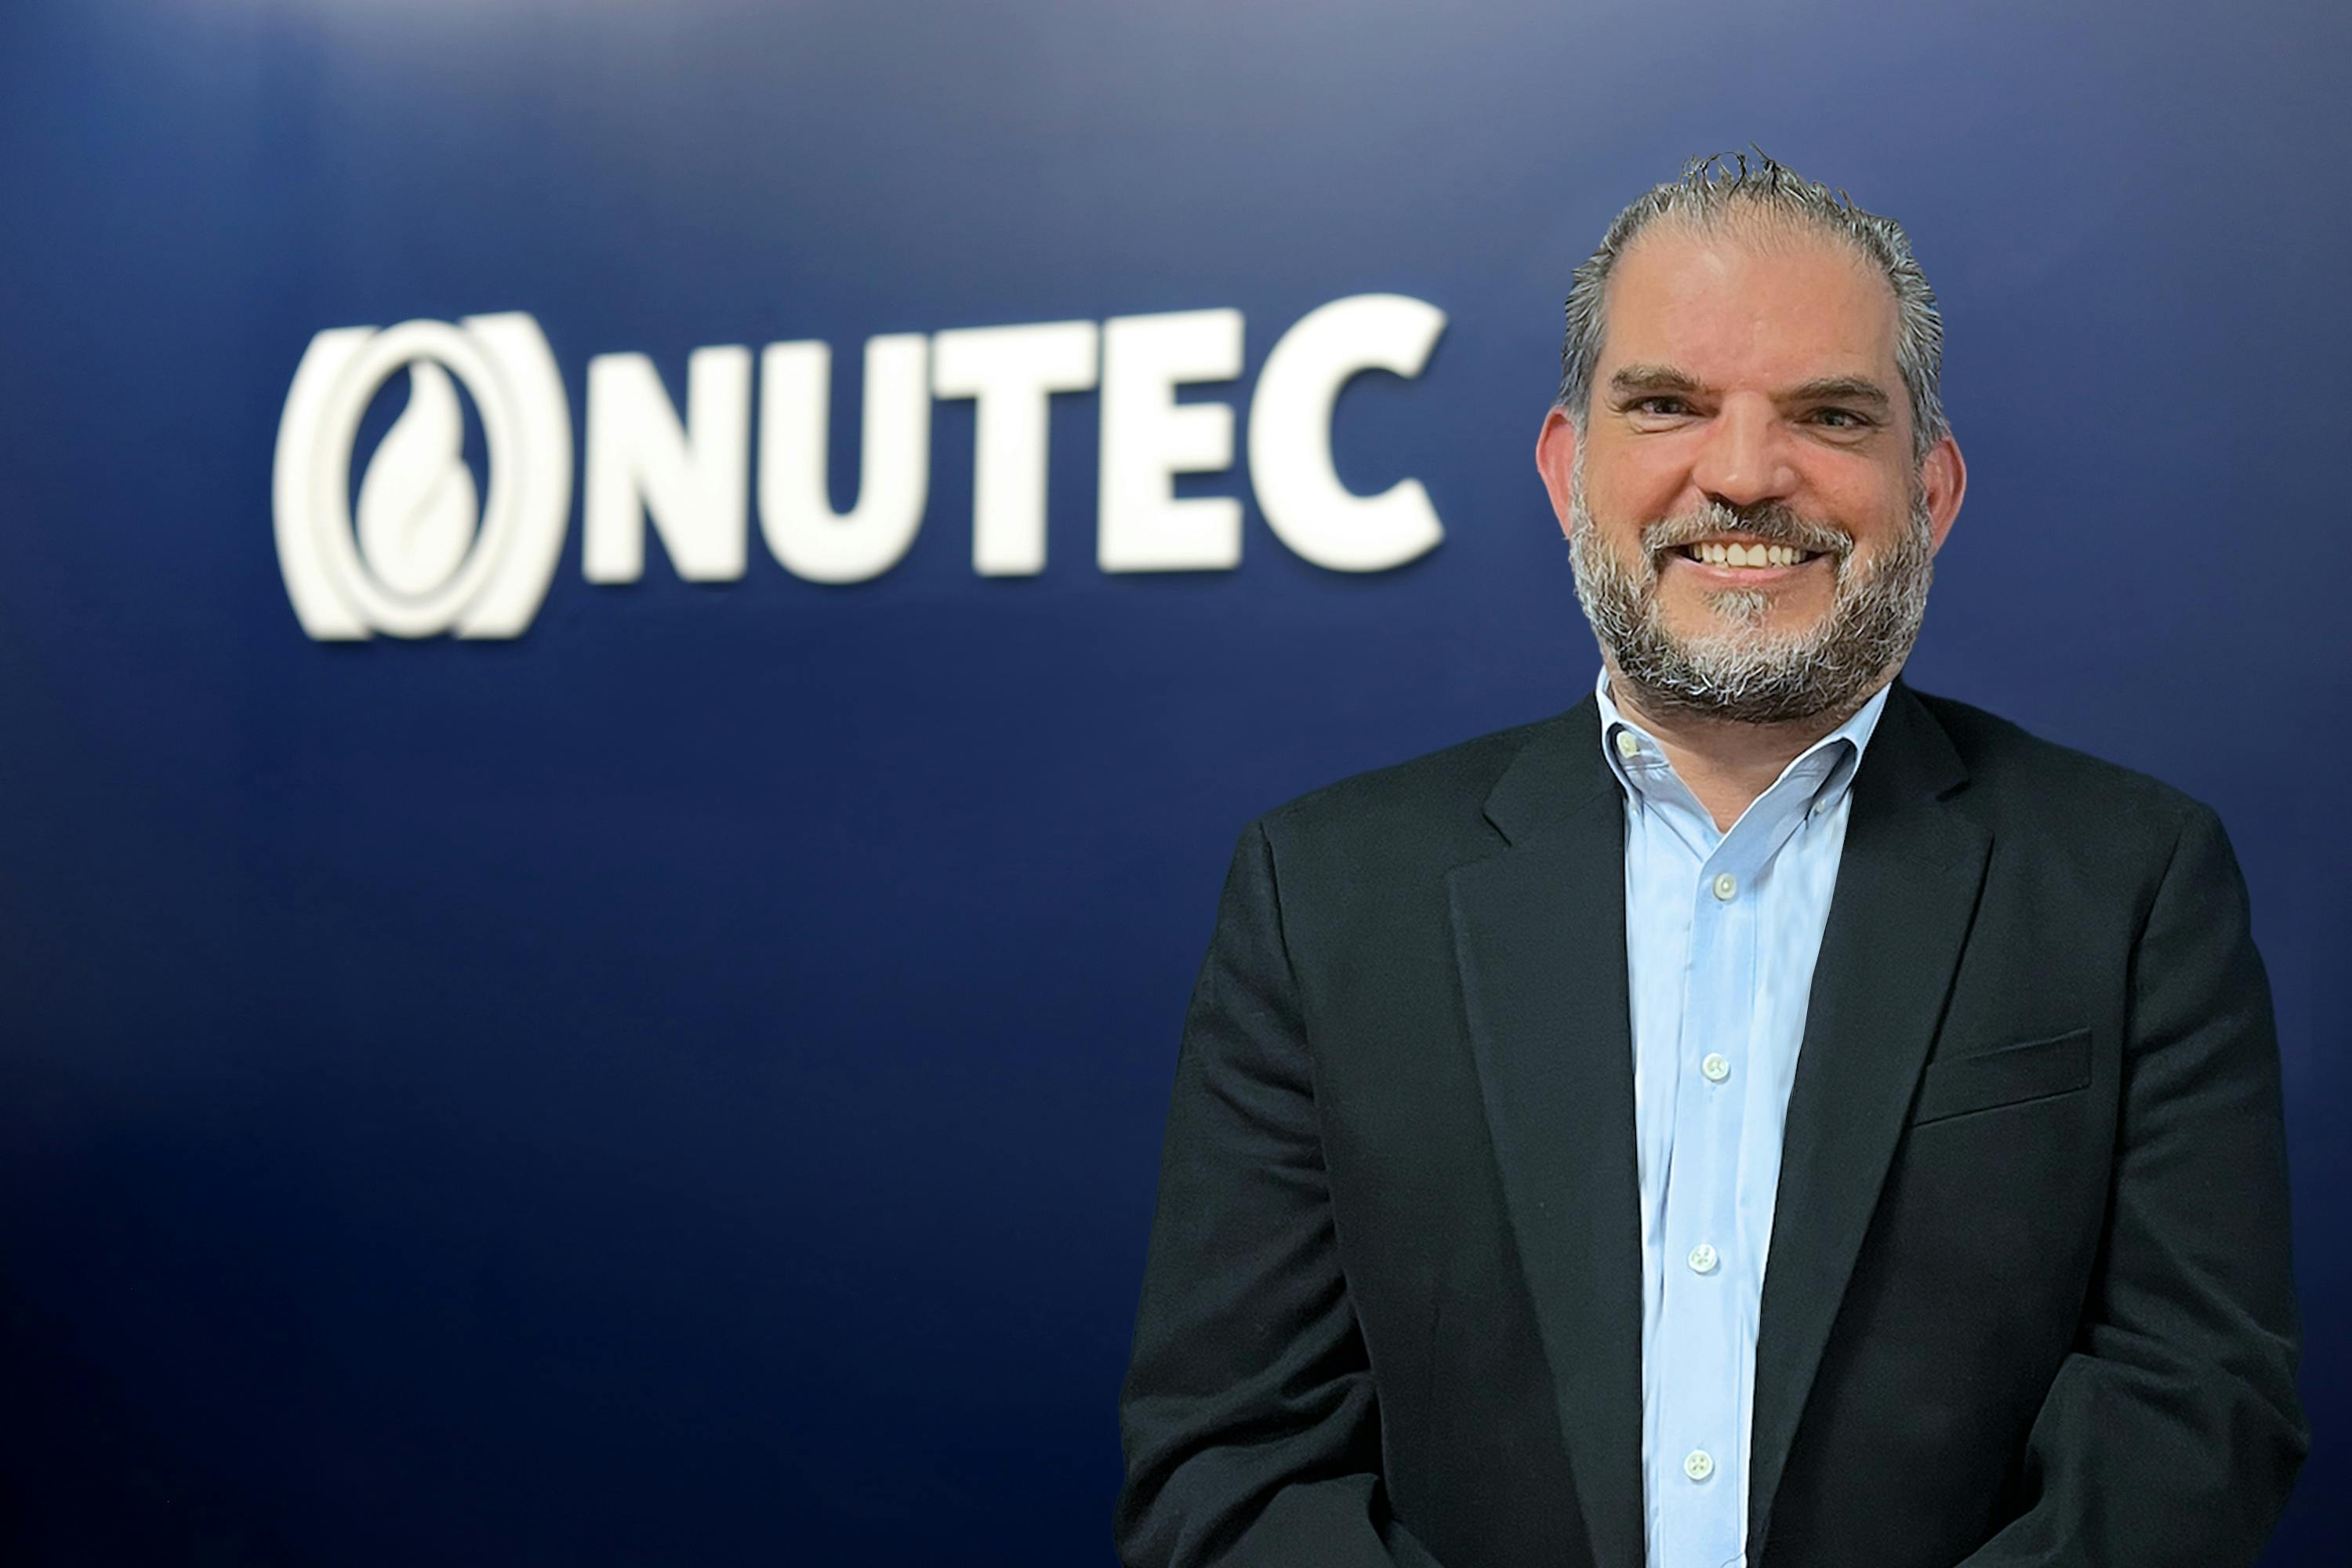 New President for NUTEC’s Fibers Division